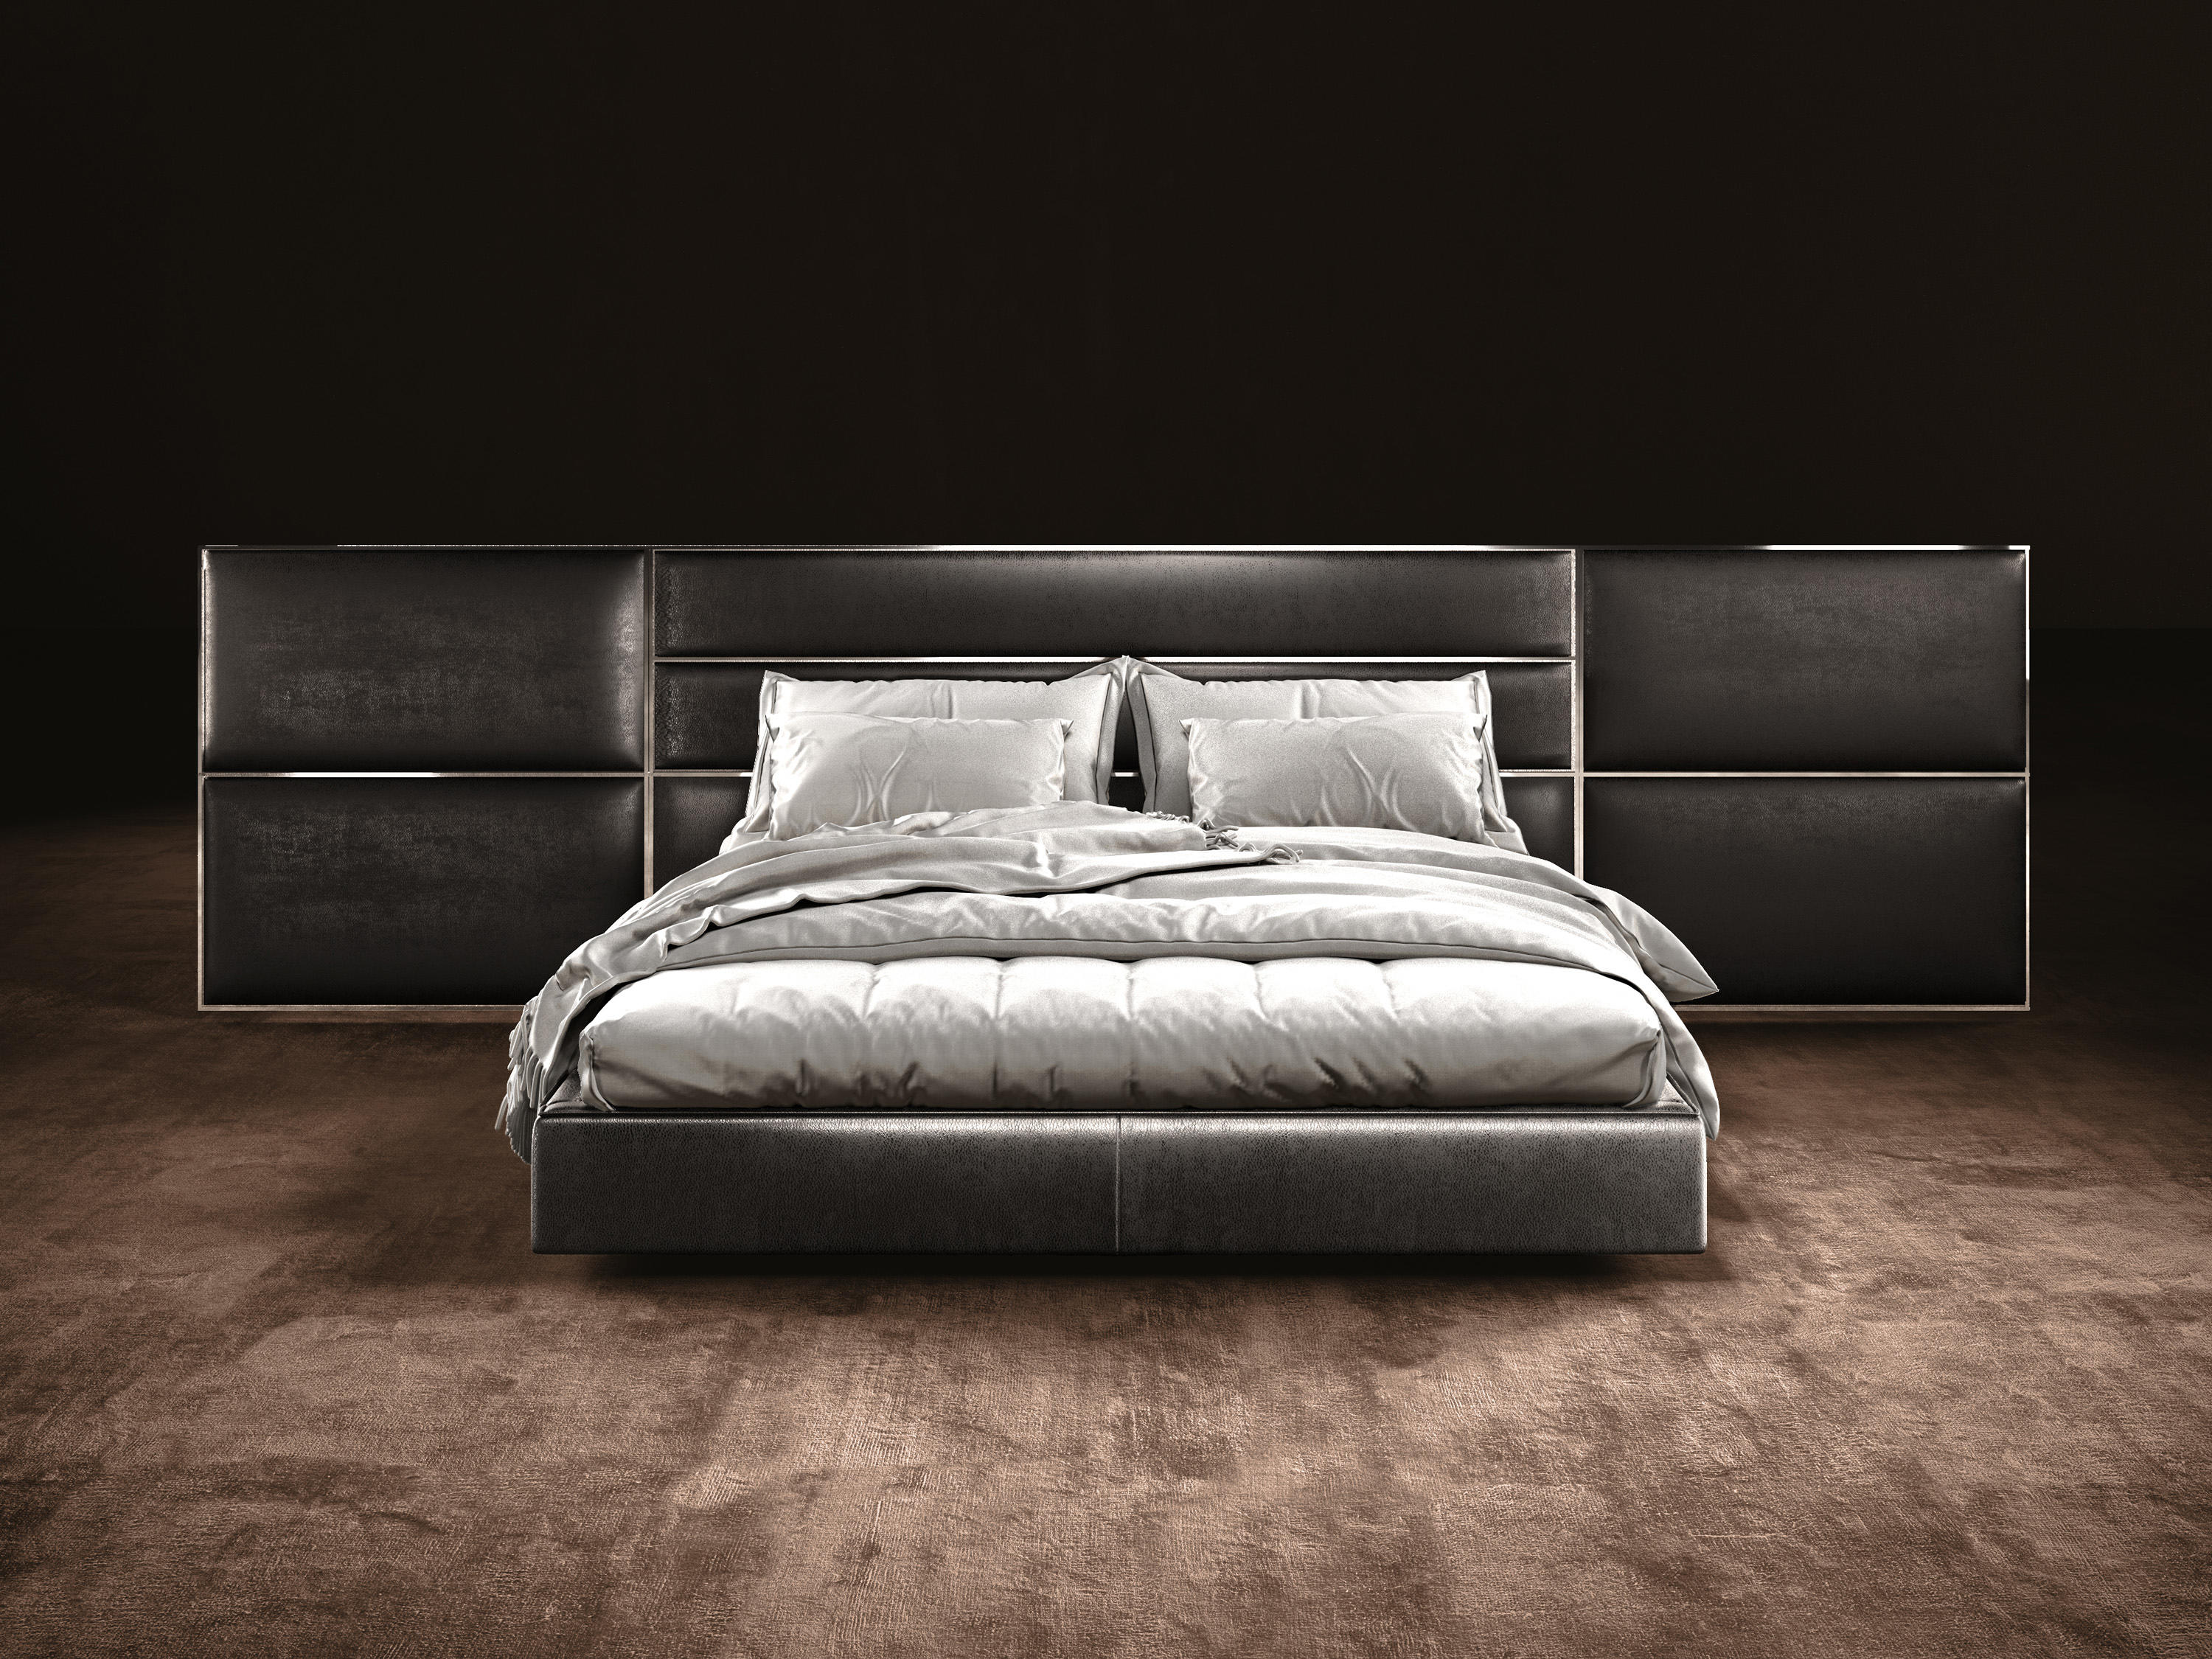 GUILTY BED - Beds from GIOPAGANI | Architonic